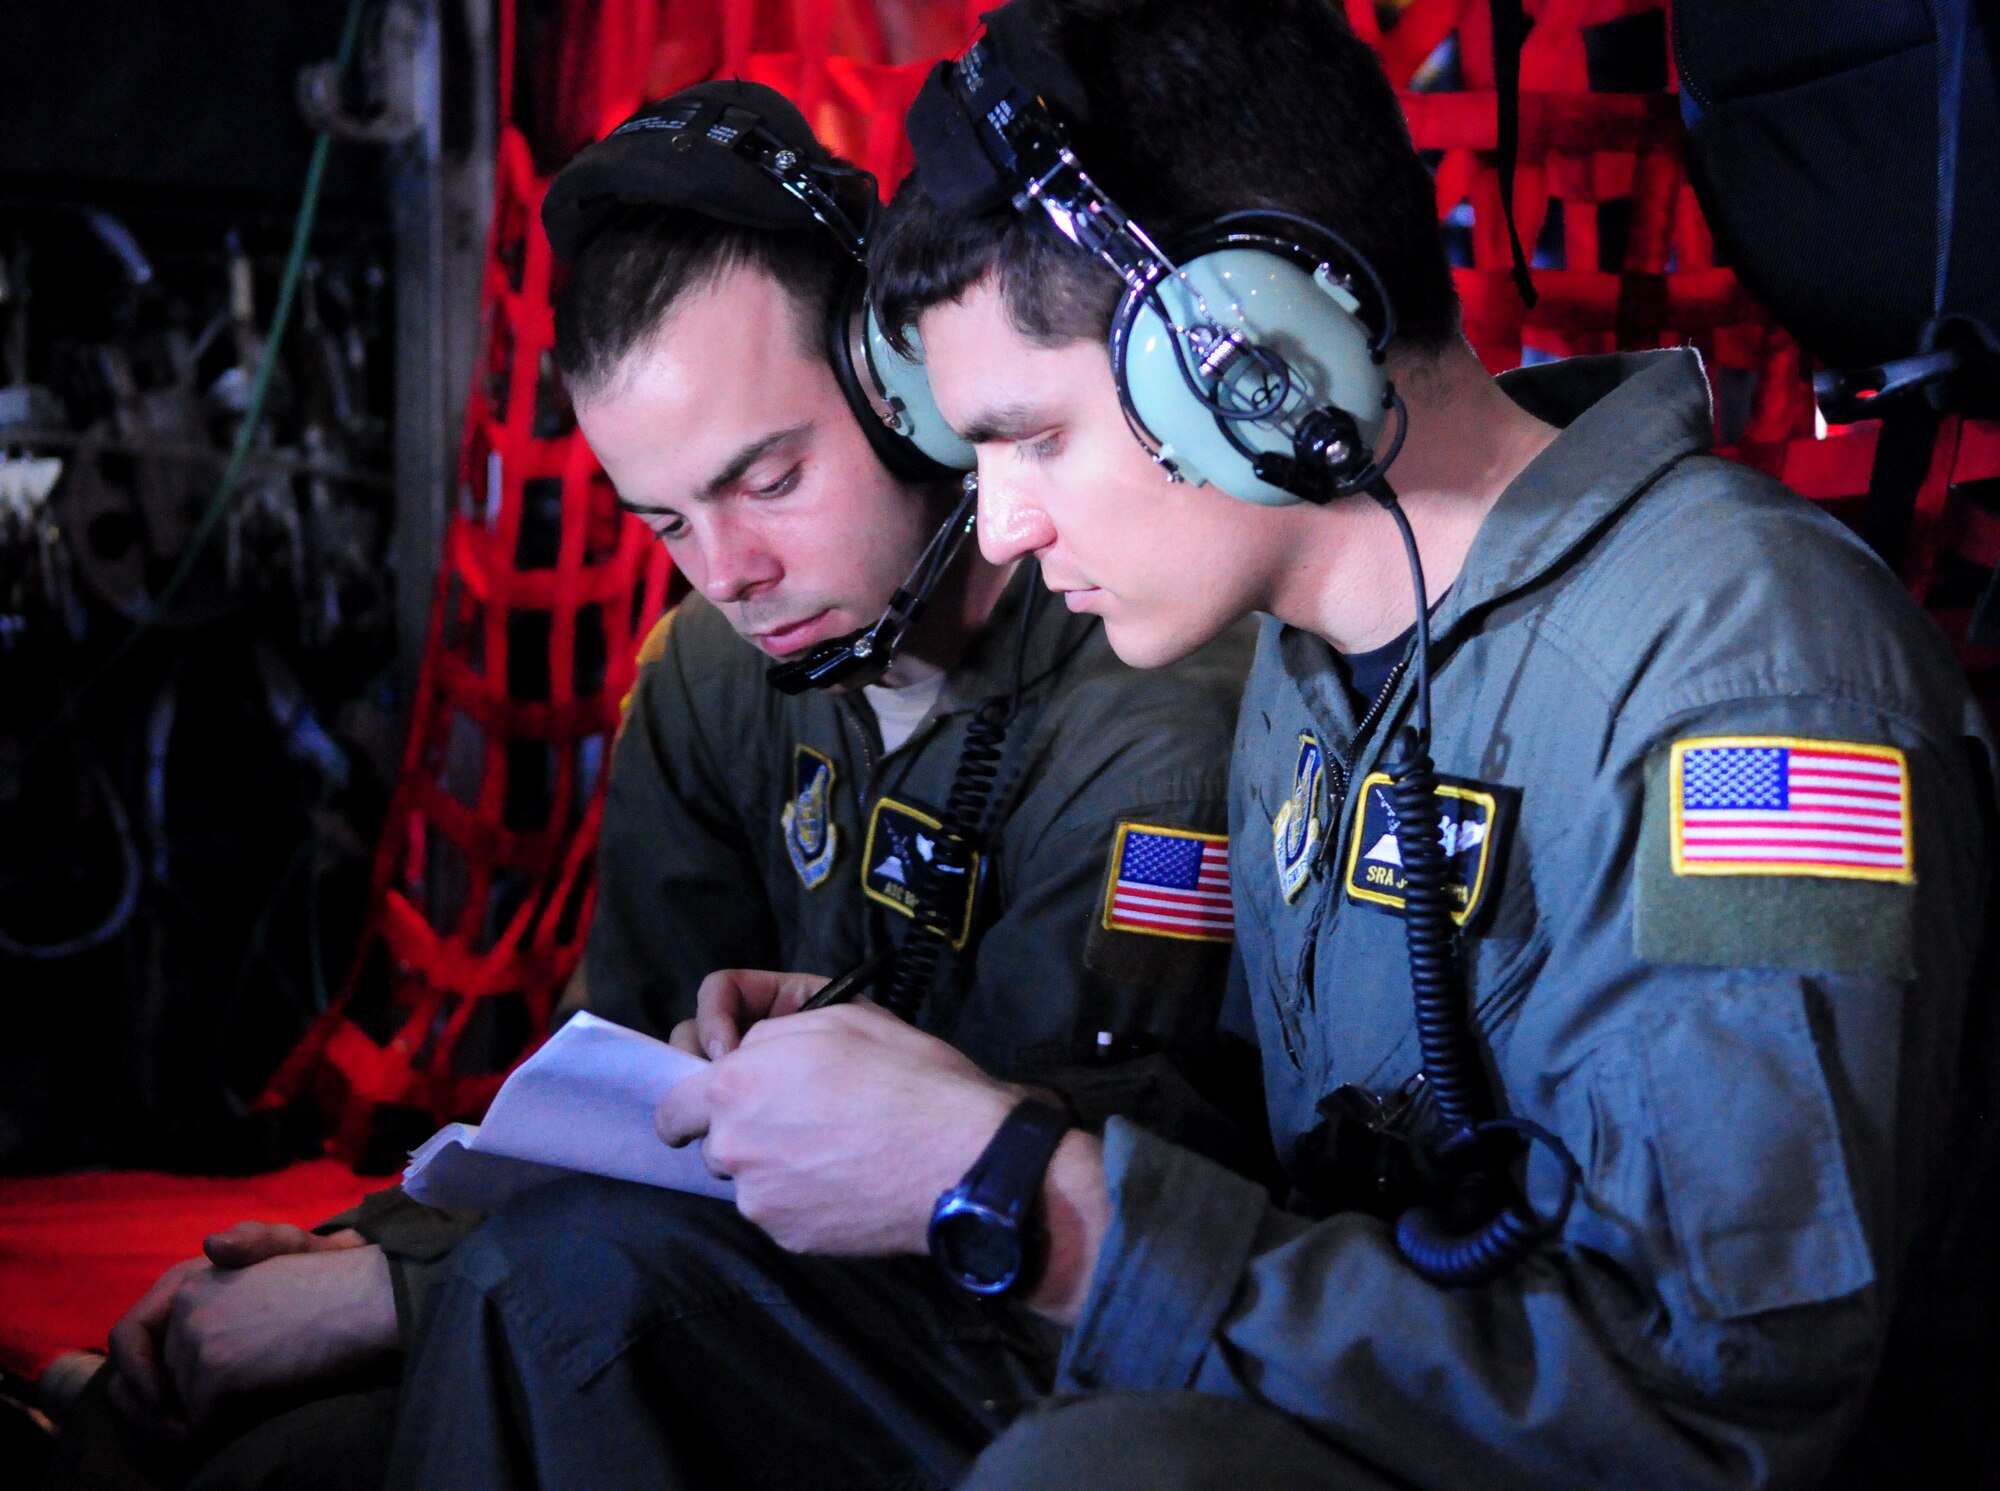 Loadmasters from 36th Airlift Squadron, Yokota Air Base, Japan, Airman 1st Class Brandon Lee and Senior Airman Joseph Doria, review mission documents after completing airdrops over the Yap Islands of Woleai Falalop, Woleai Tagailap, Woleai Saliap, Woleai Wottegai, Woleai Falalis and Eauripik with a combined population of more than 1,140 people during Operation Christmas Drop, Dec. 14. Airmen from the 36th Wing, Andersen Air Force Base, Guam and the 36th Airlift Squadron, Yokota Air Base, Japan, come together each year as a part of a training exercise to drop thousands of pounds of donated supplies over the Micronesian Islands. This year more than 20,000 pounds of supplies, worth more than $93,000 will be dropped over 55 Micronesian Islands throughout the week. (U.S. Air Force photo/ Senior Airman Nichelle Anderson)  